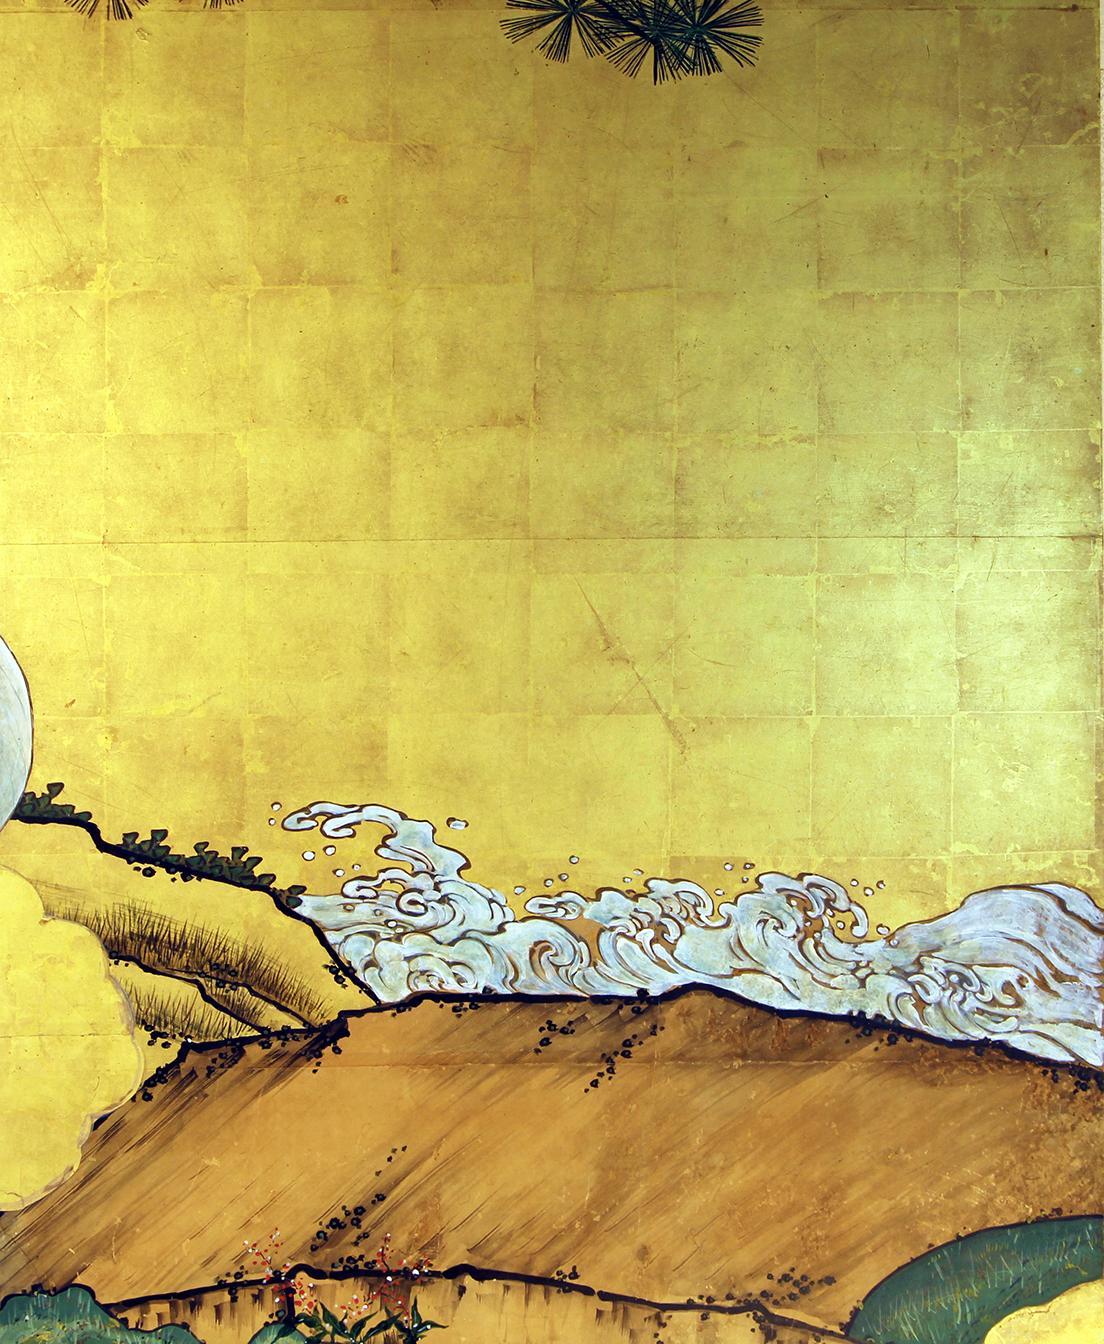 Hand-Painted Japanese Folding Screen